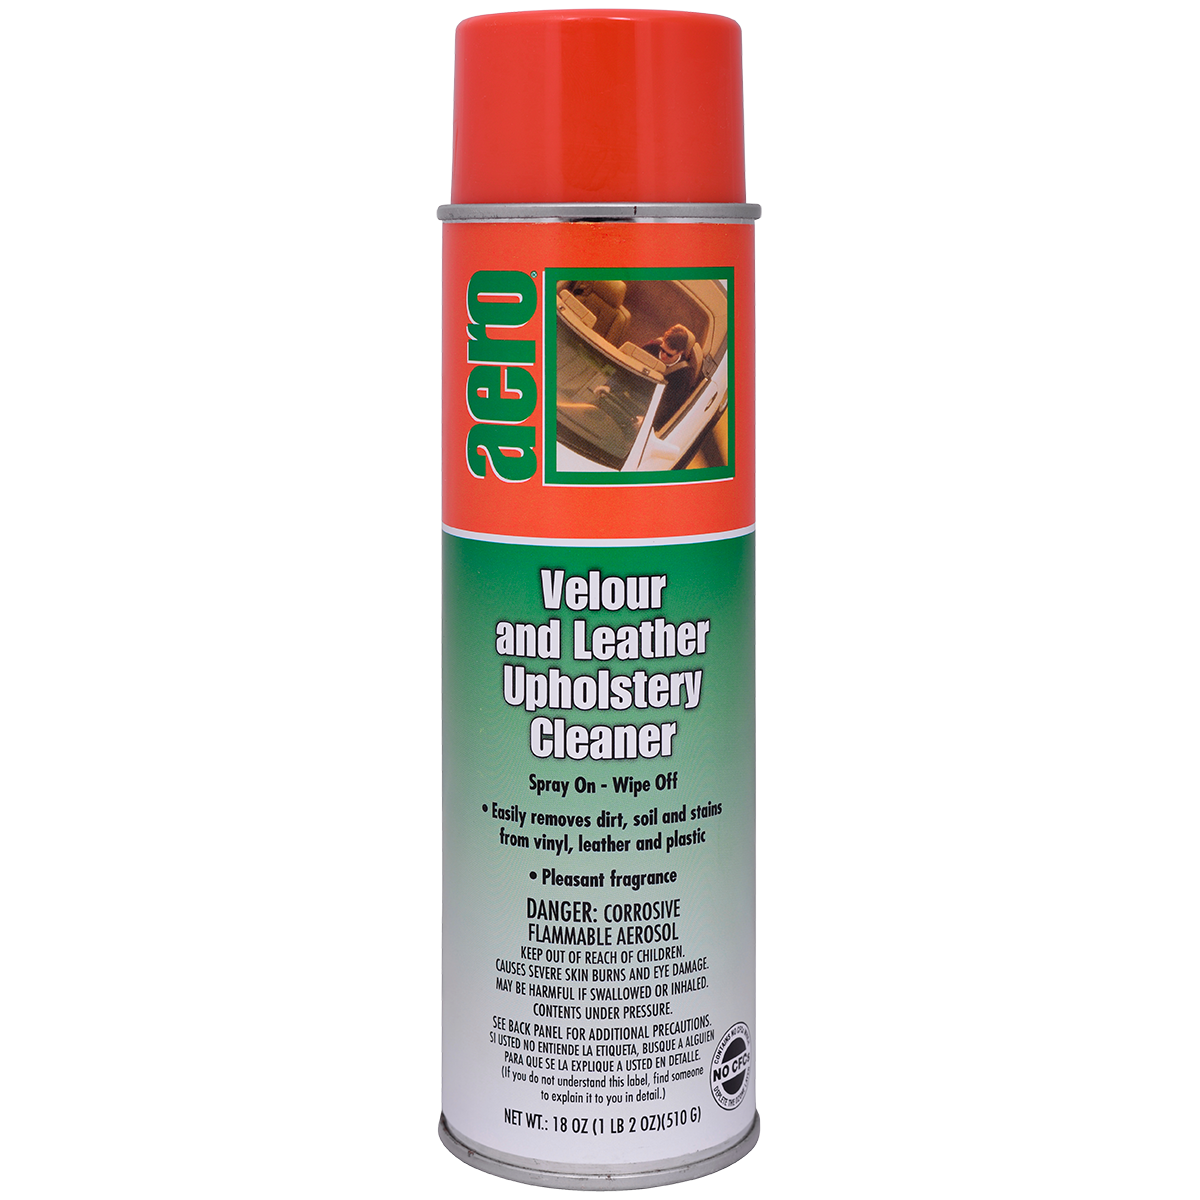 Velour and Leather Upholstery Cleaner